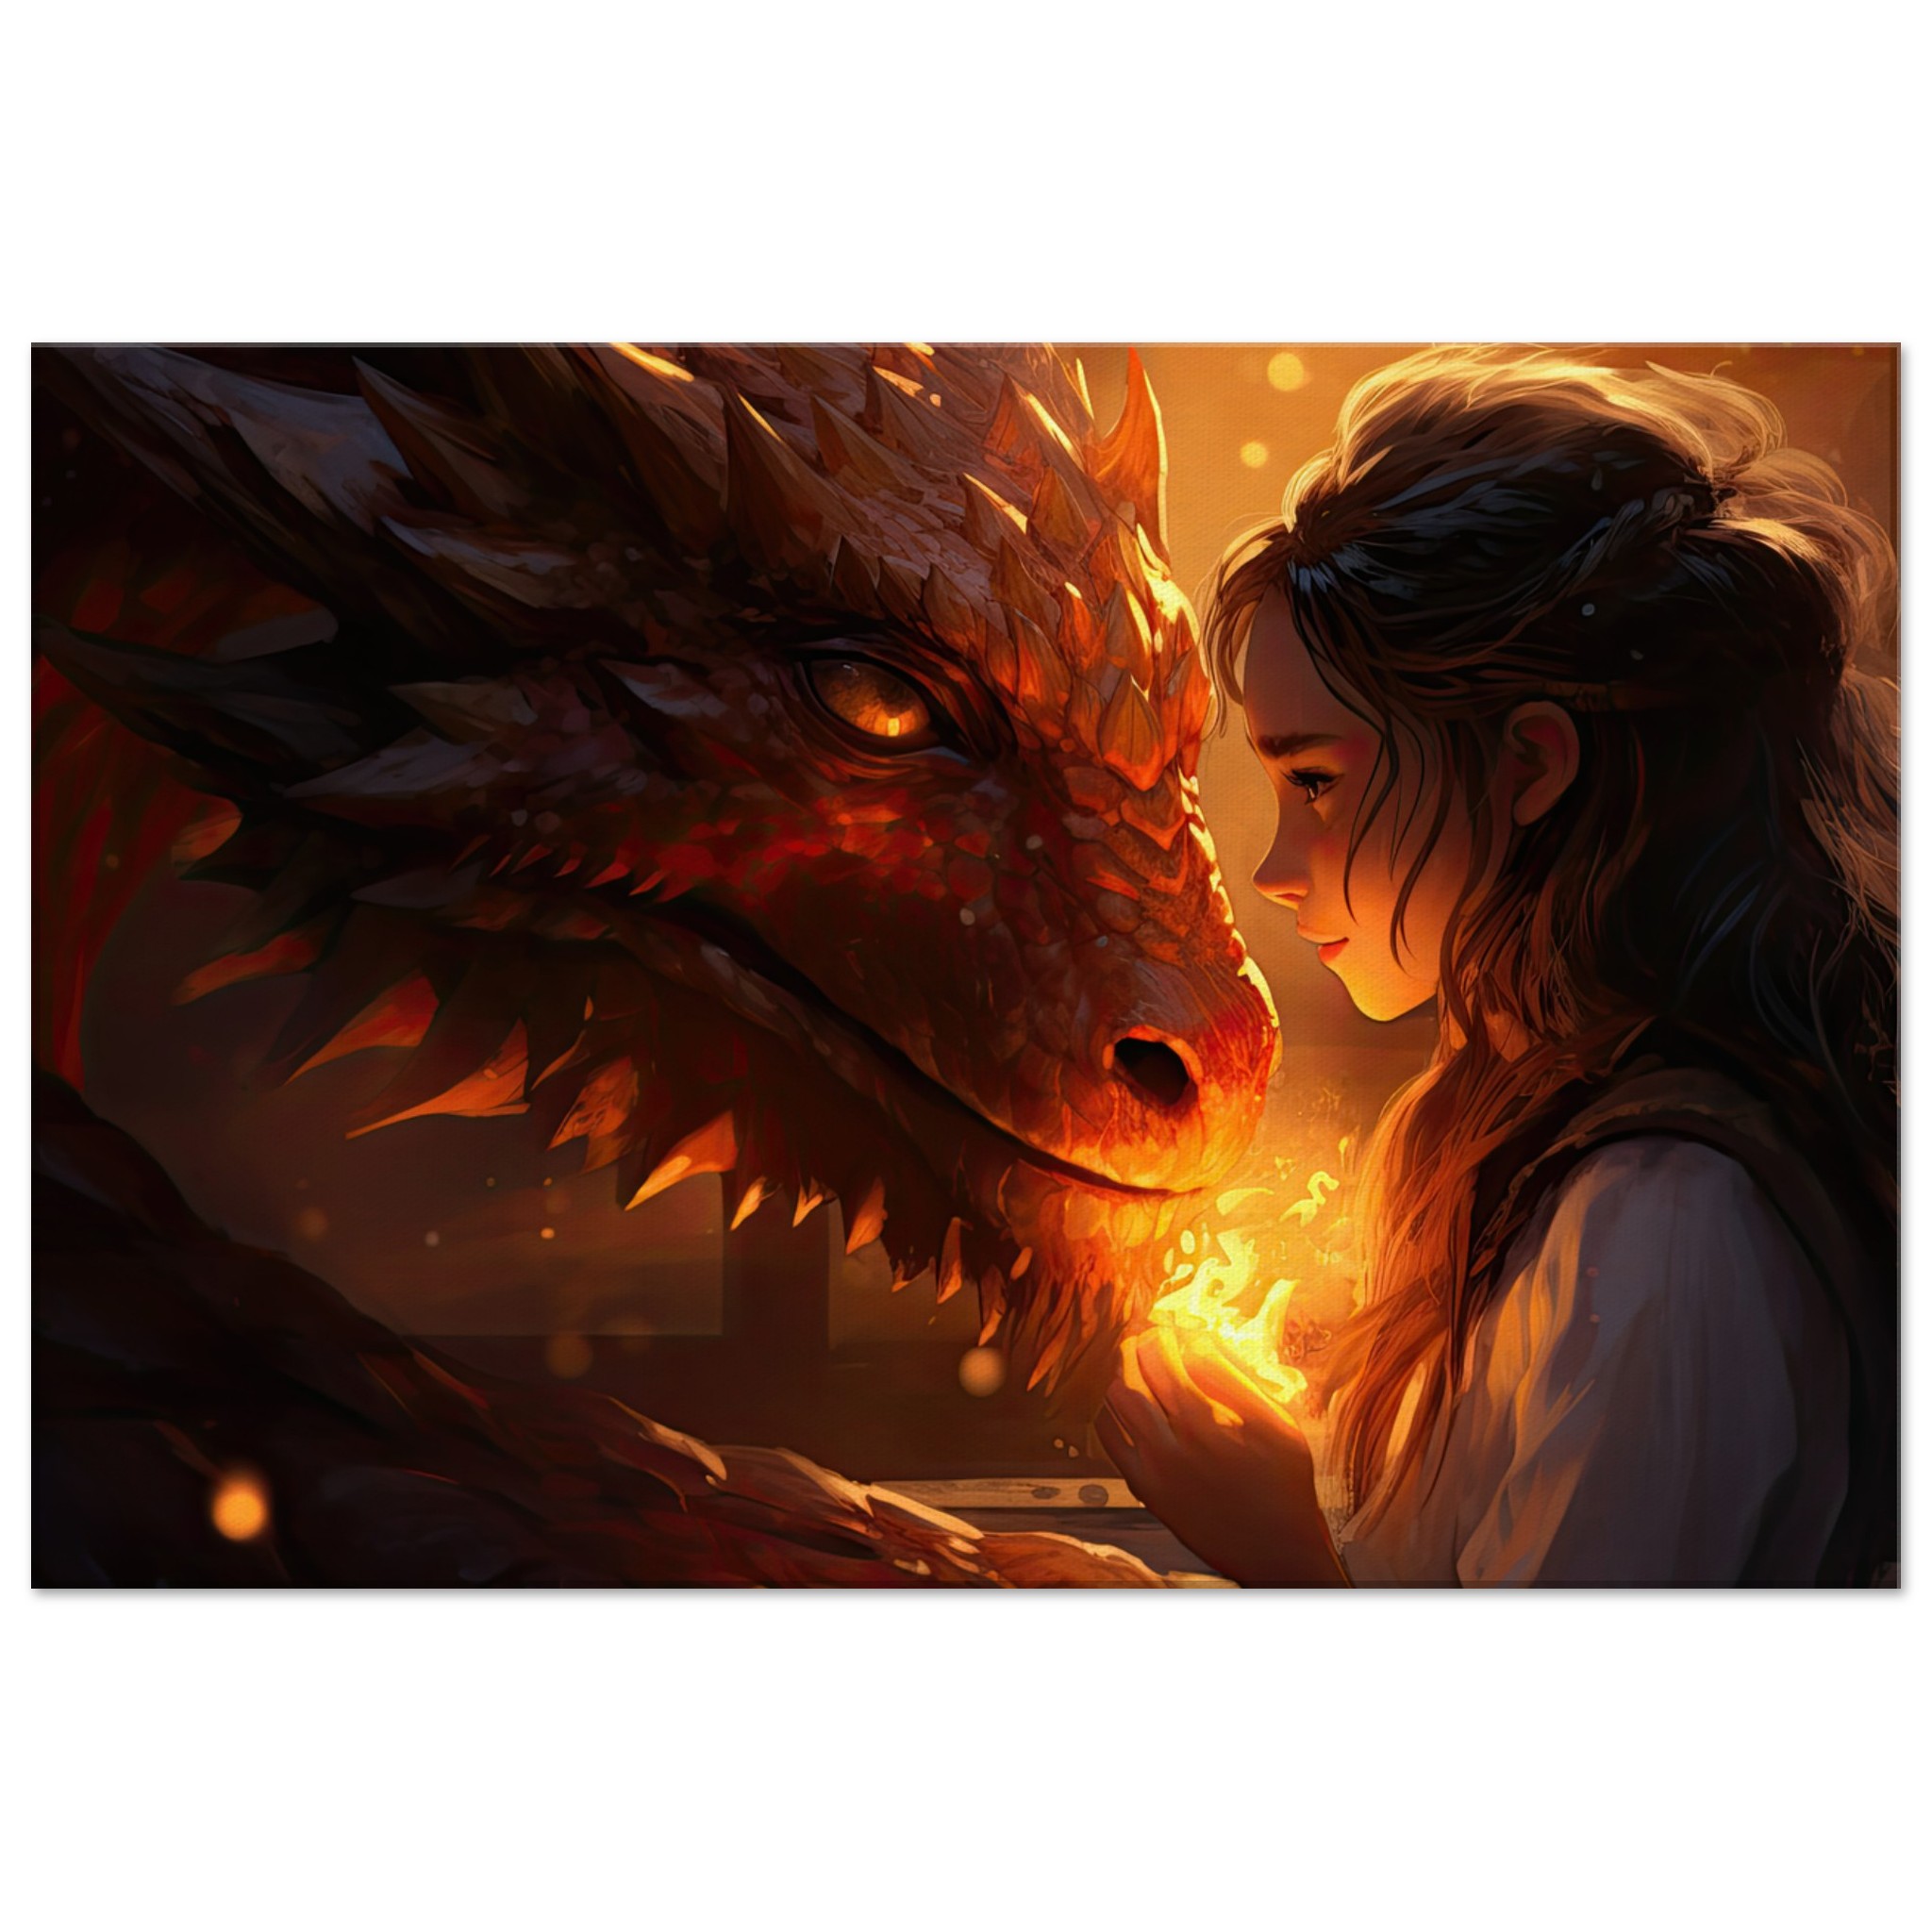 Magical Friendship – Girl and Dragon – Canvas Print – 60×90 cm / 24×36″, Thick